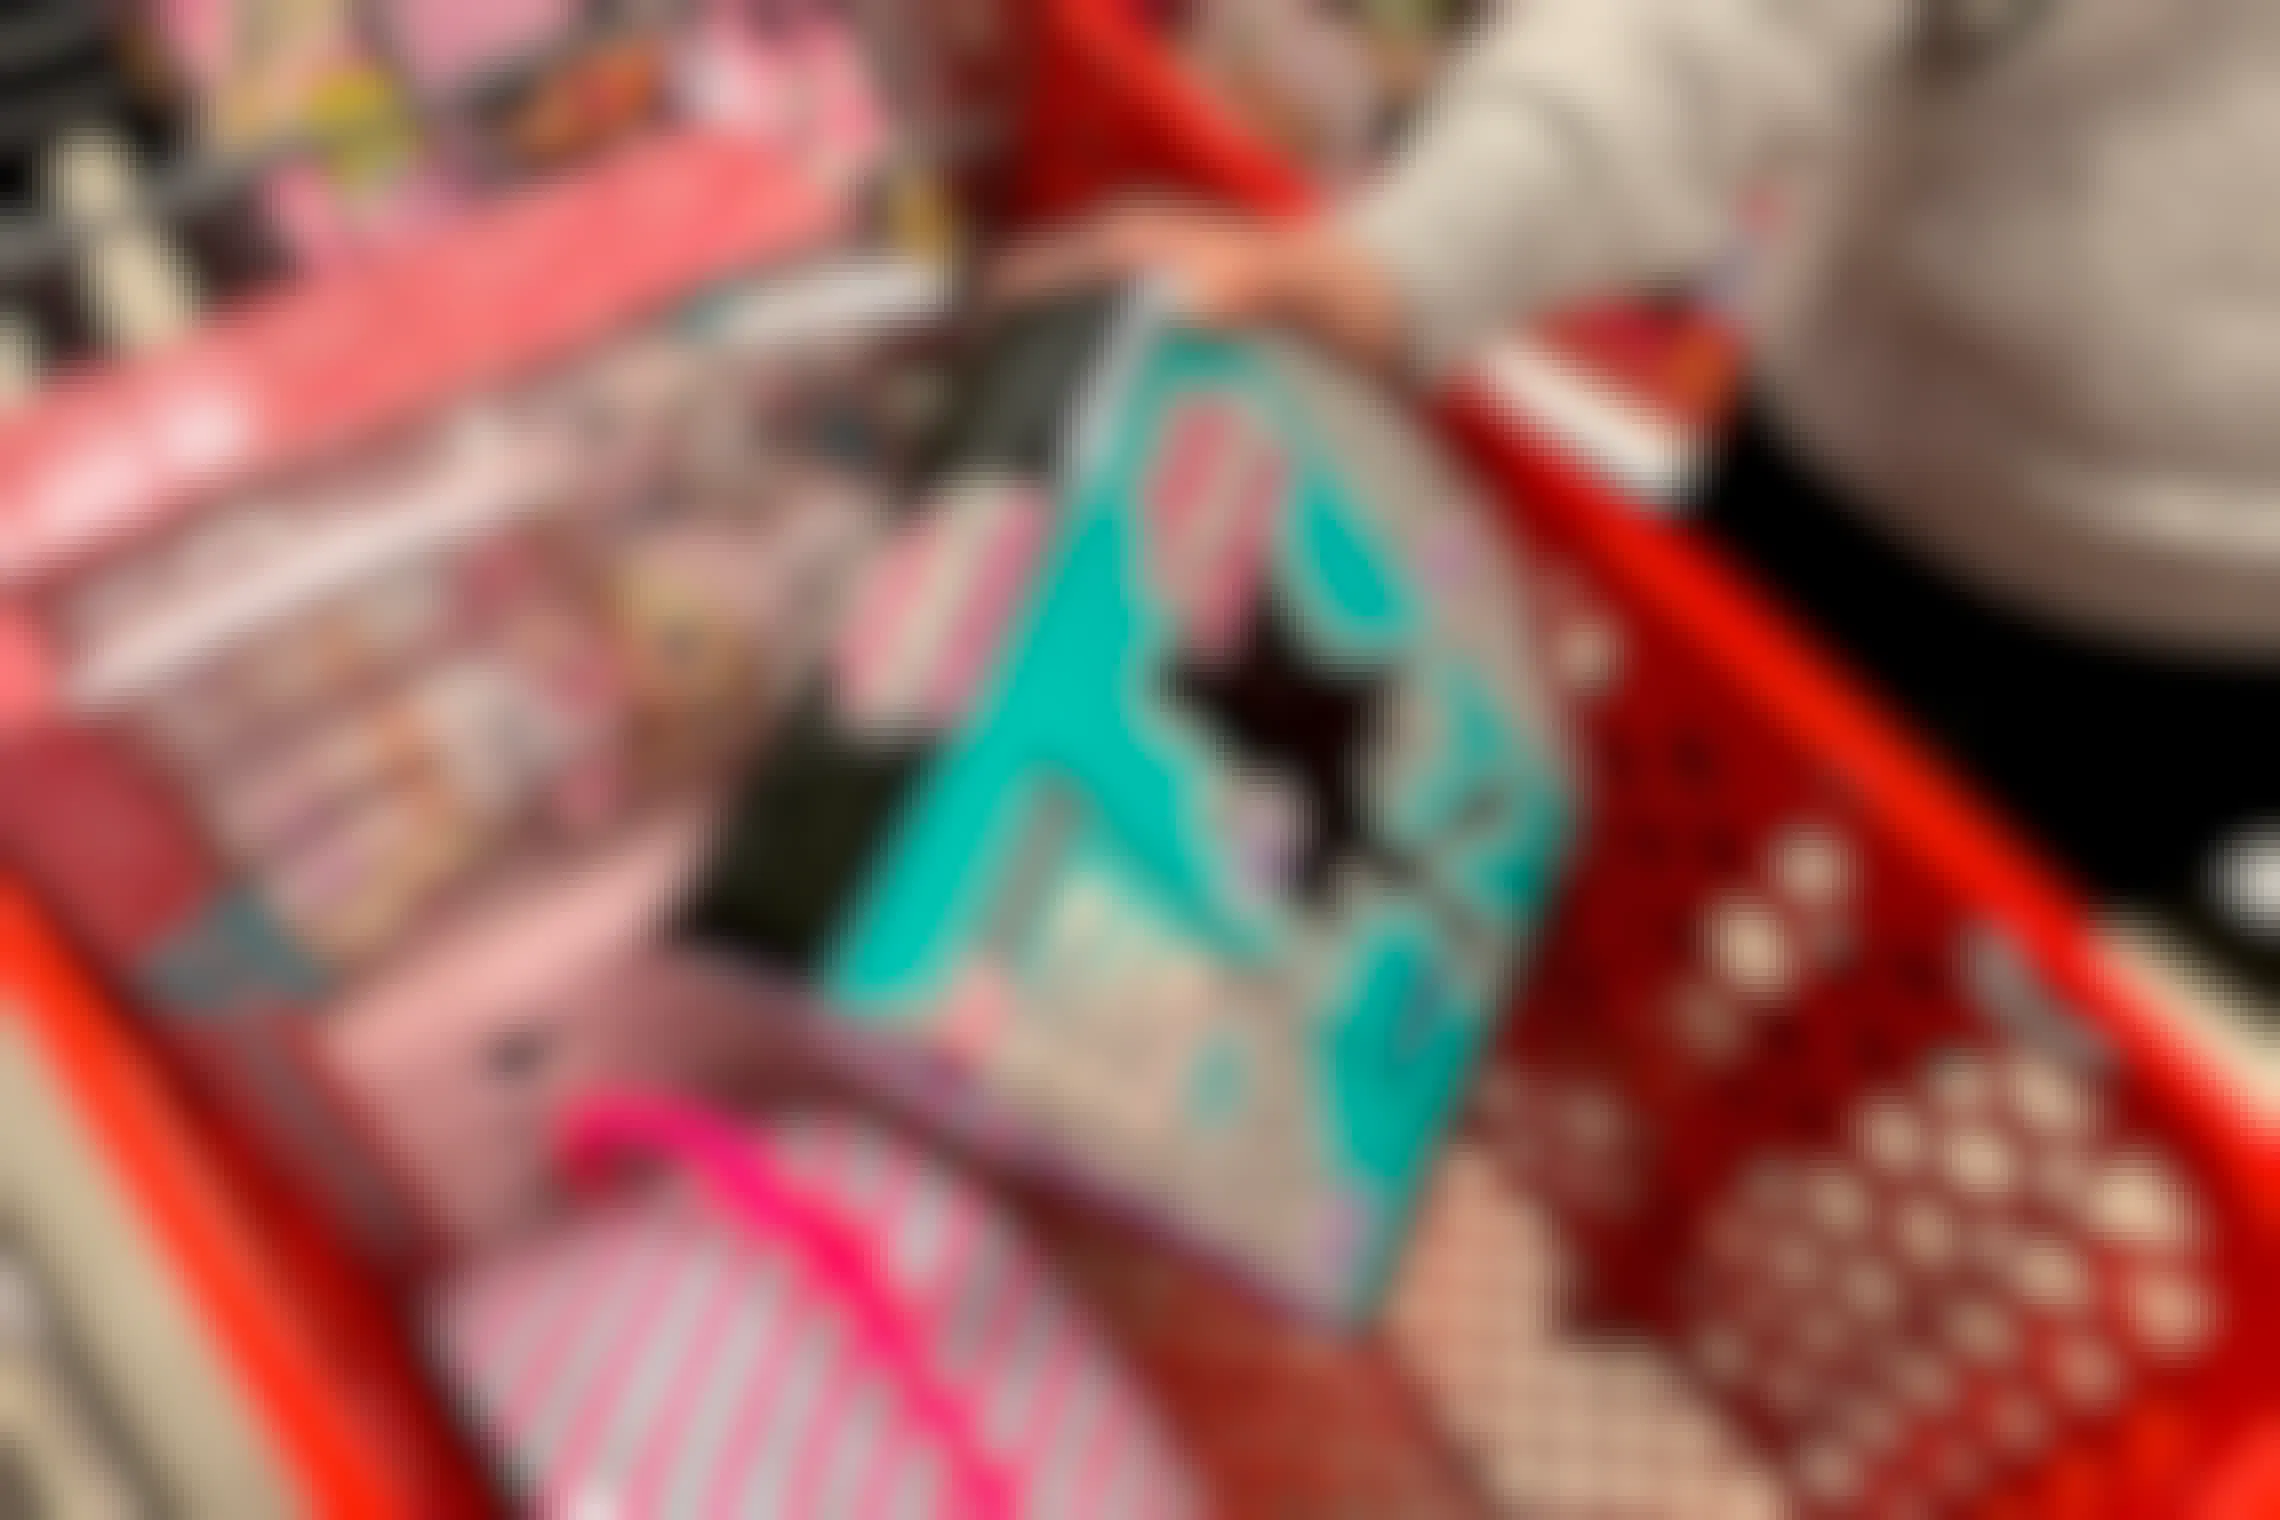 Woman loading her shopping cart at target with LOL Surprise doll toys